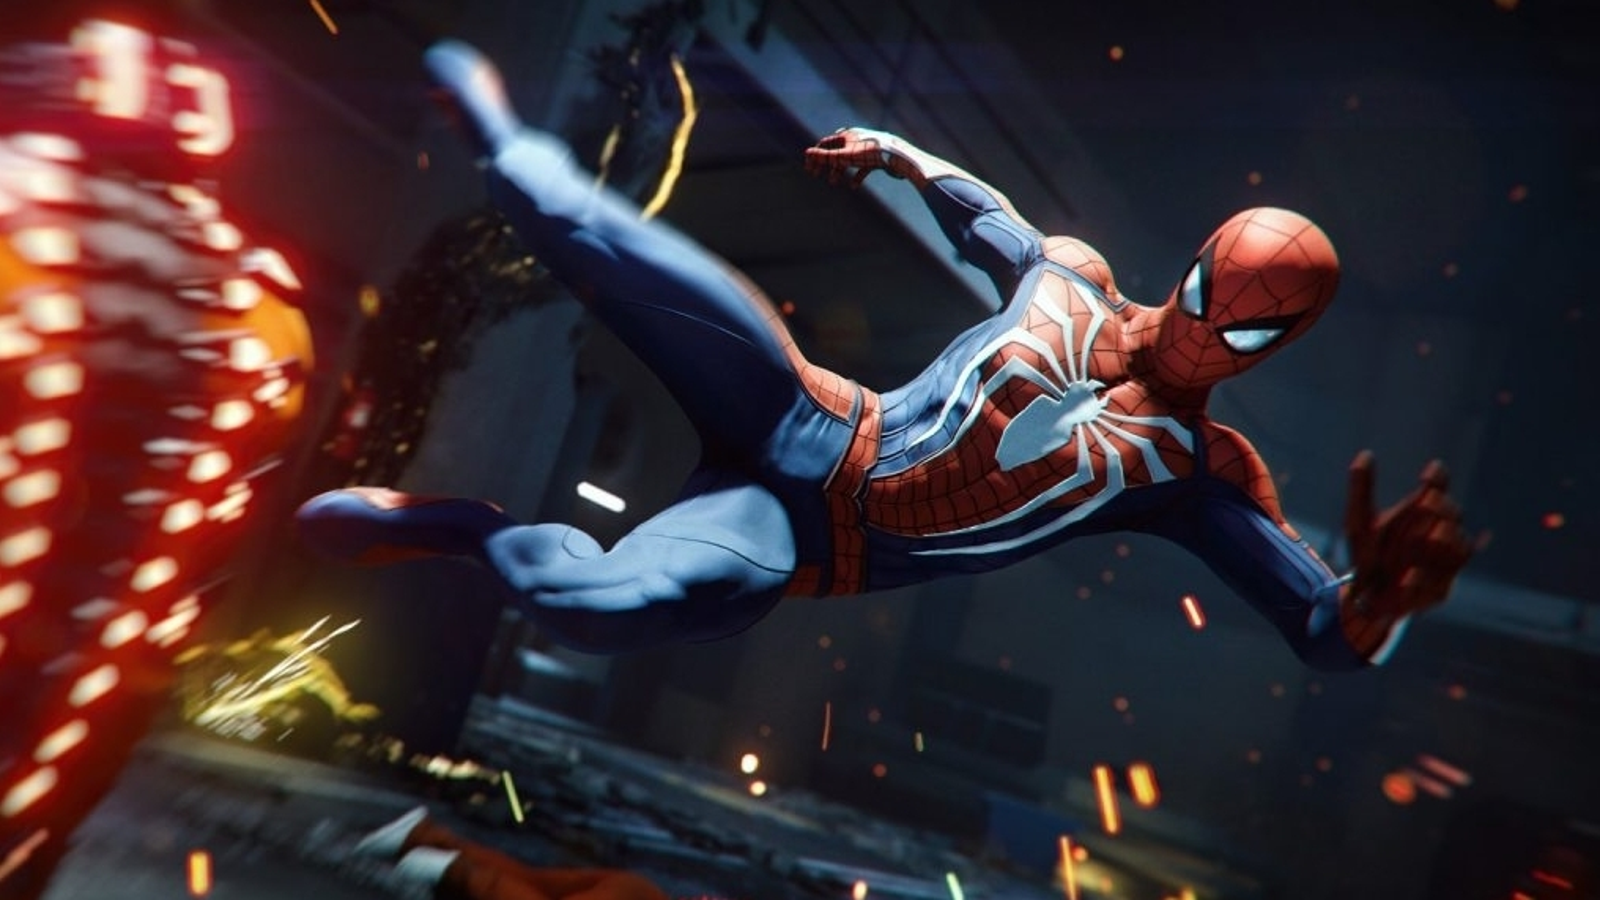 You can't transfer save files between PS4's Spider-Man and its PS5